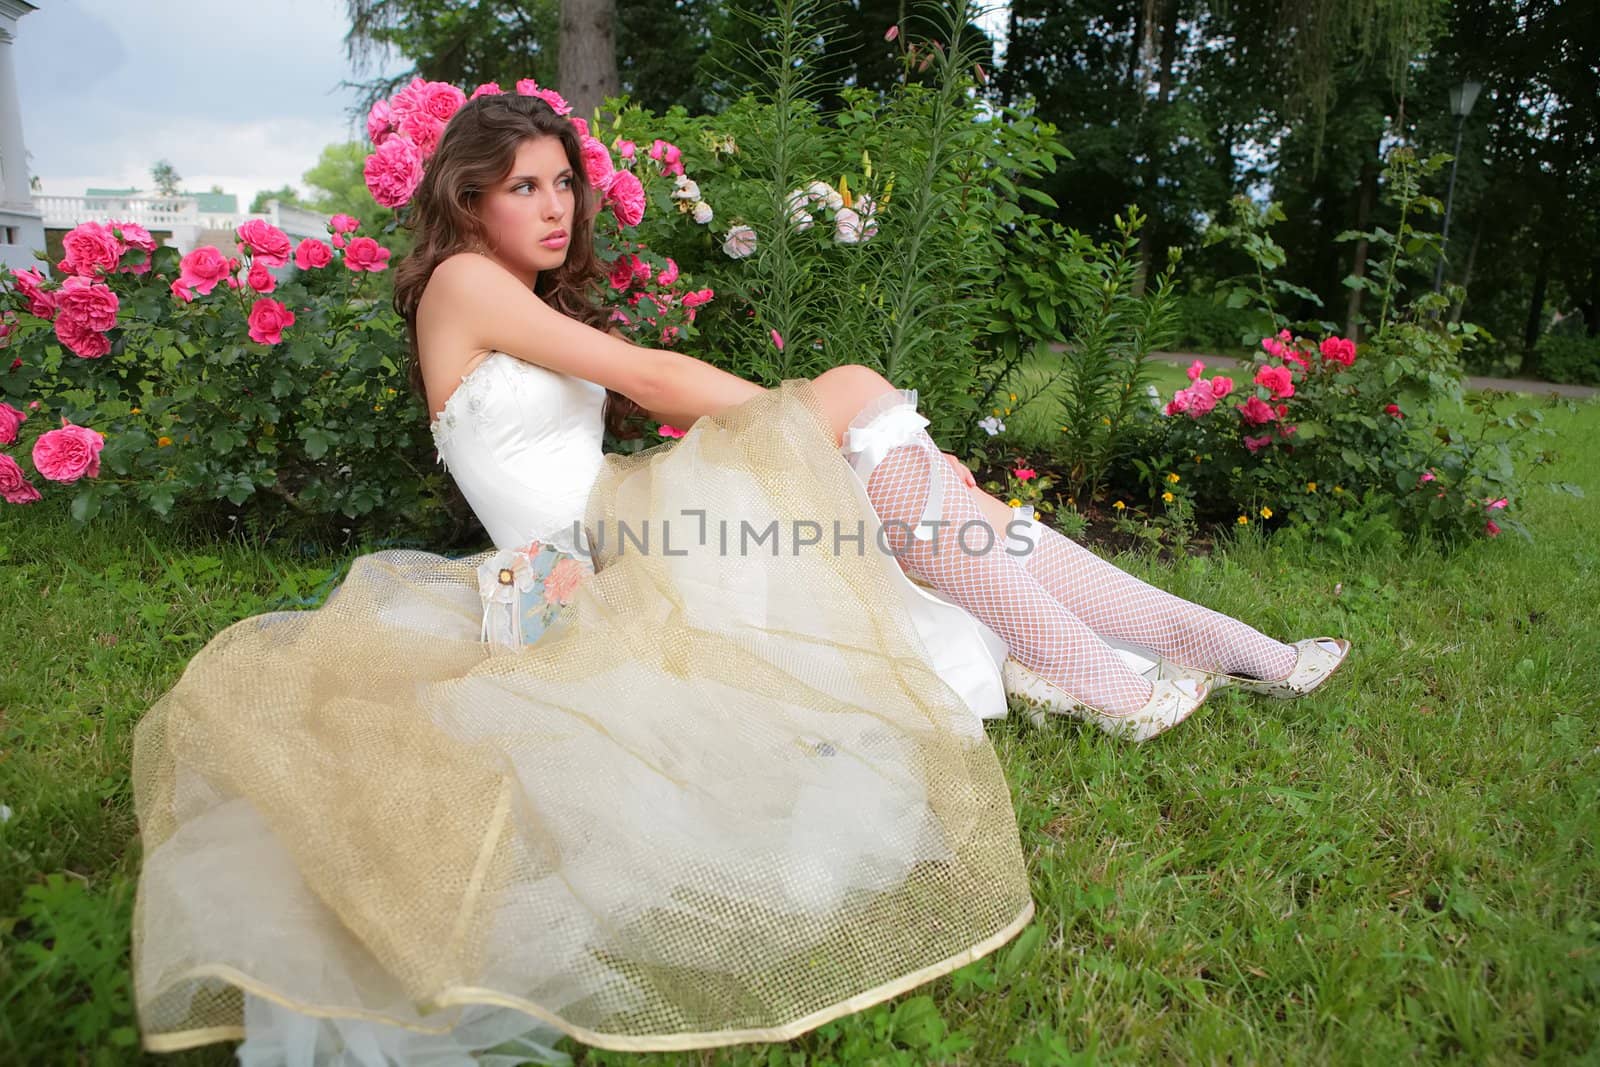 beautiful girl in wedding white-golden gown sits on herb in town park under rosebush